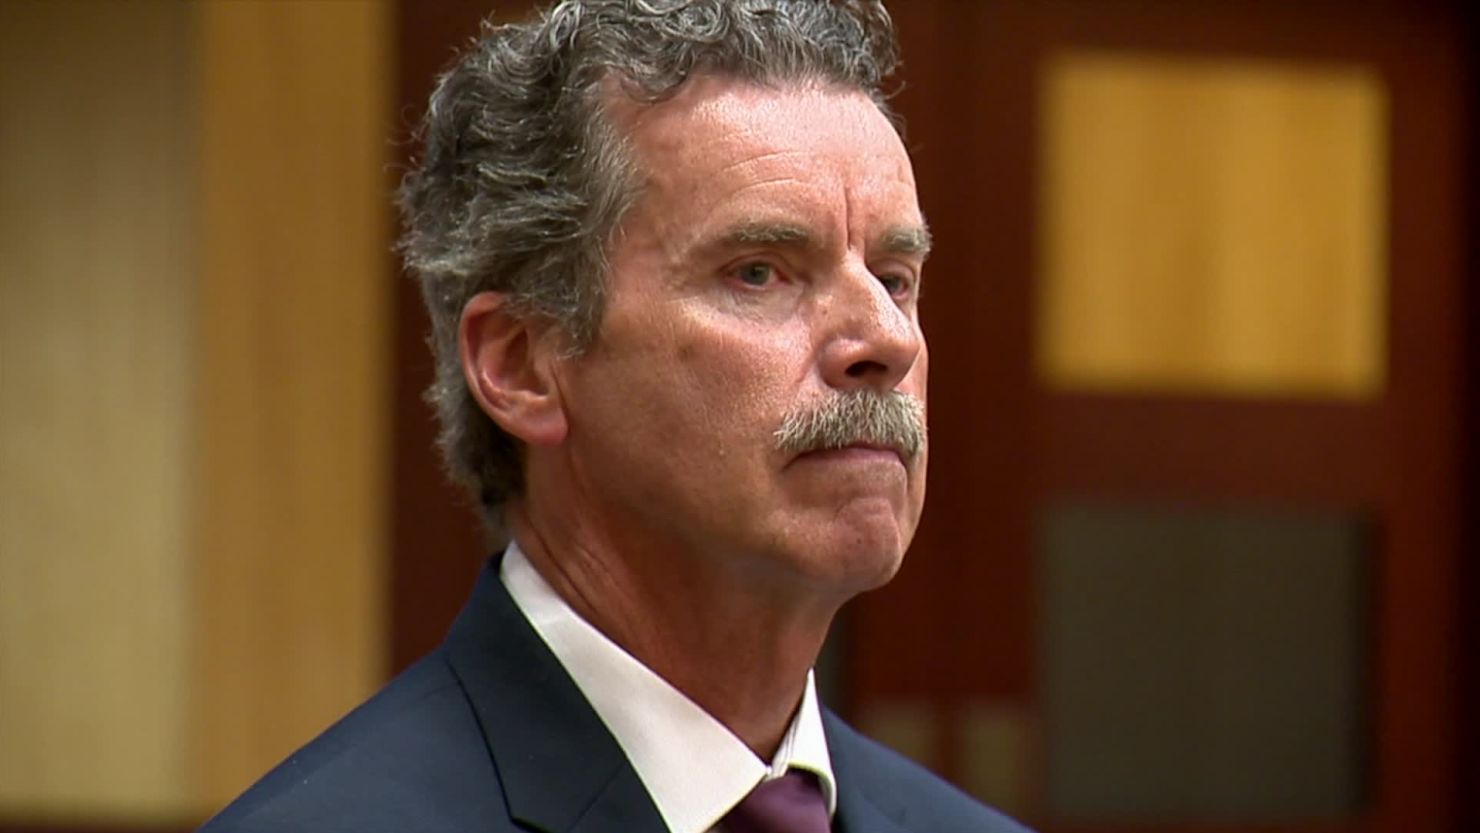 Kevin Conners appears in a Connecticut superior court on Friday, June 21, 2019, after allegedly helping his wife take her own life with a firearm.